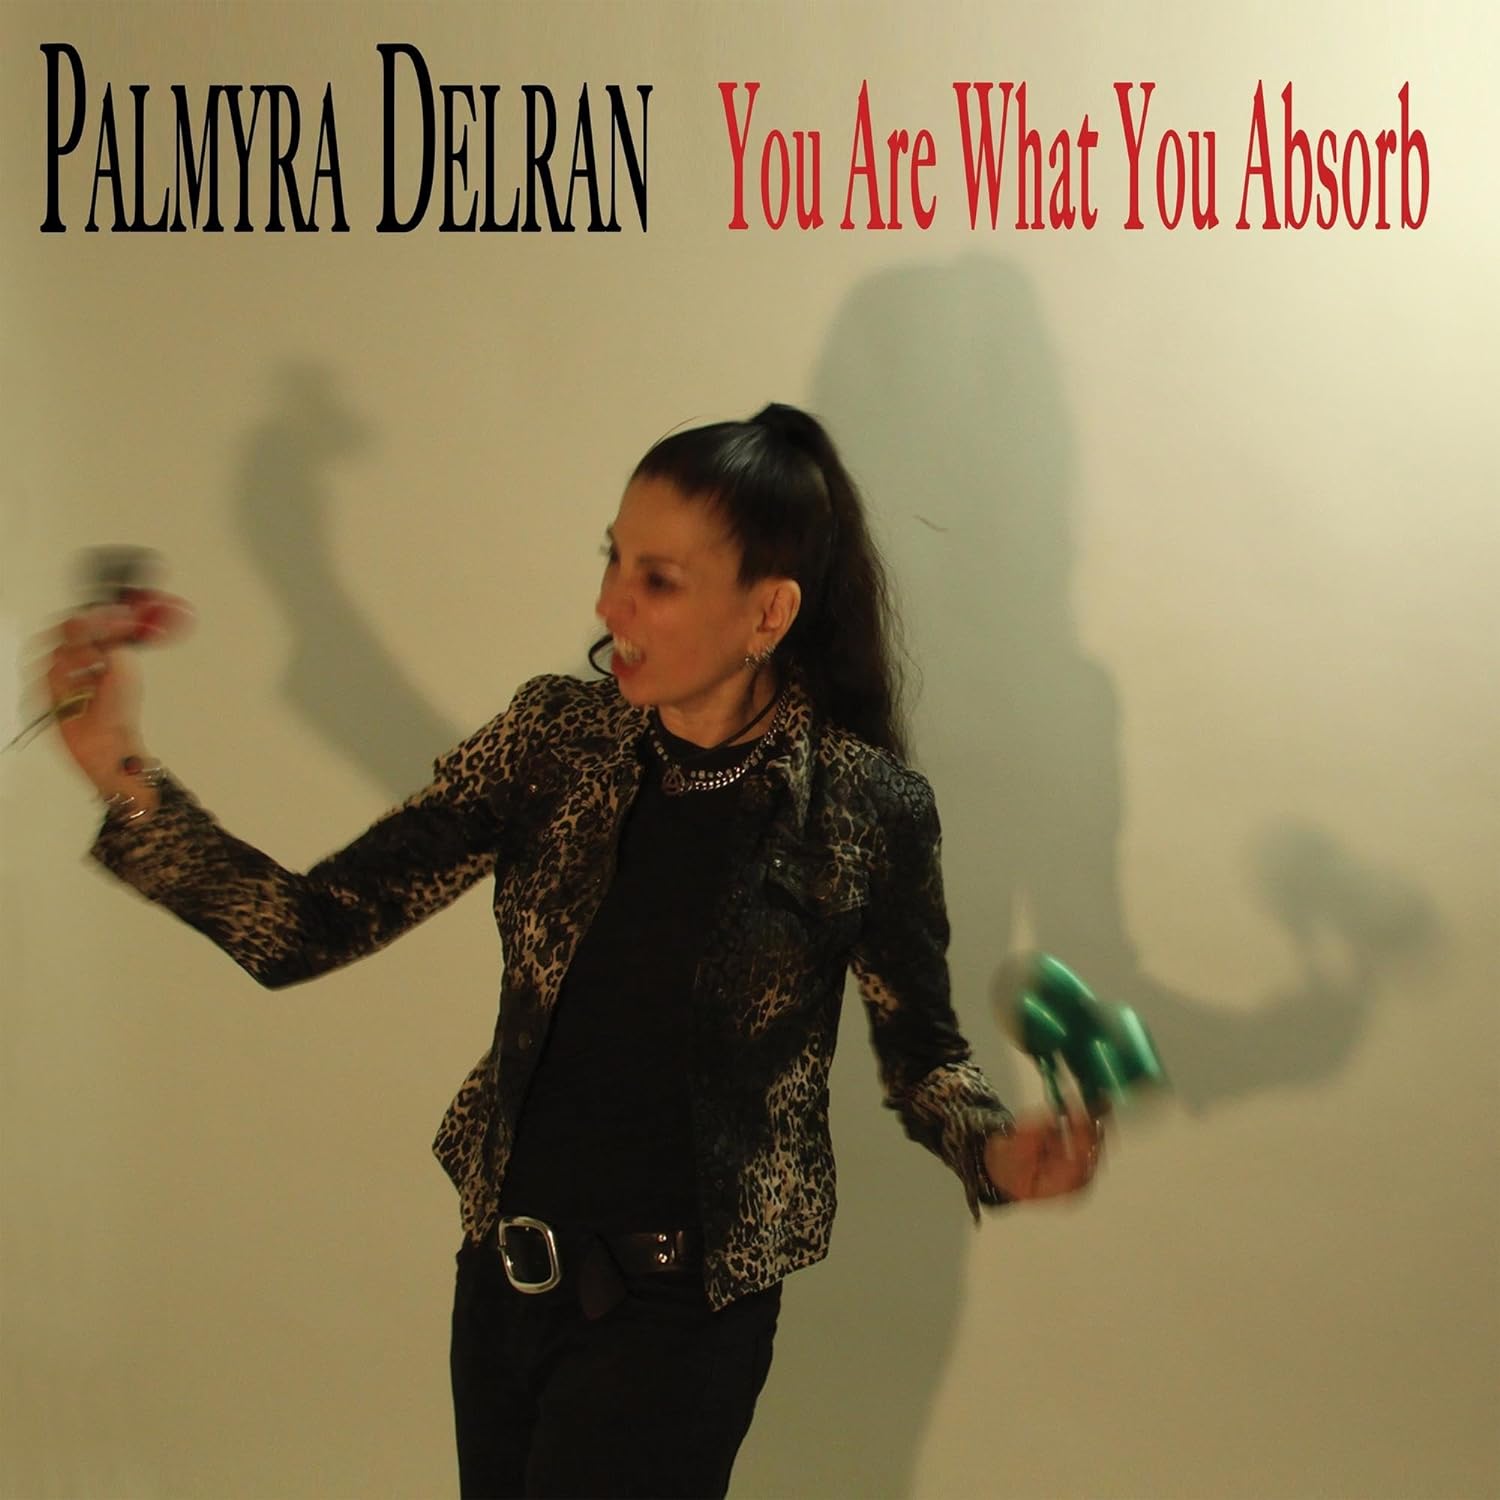 Palmyra Delran "You Are What You Absorb" Vinyl - PRE-ORDER